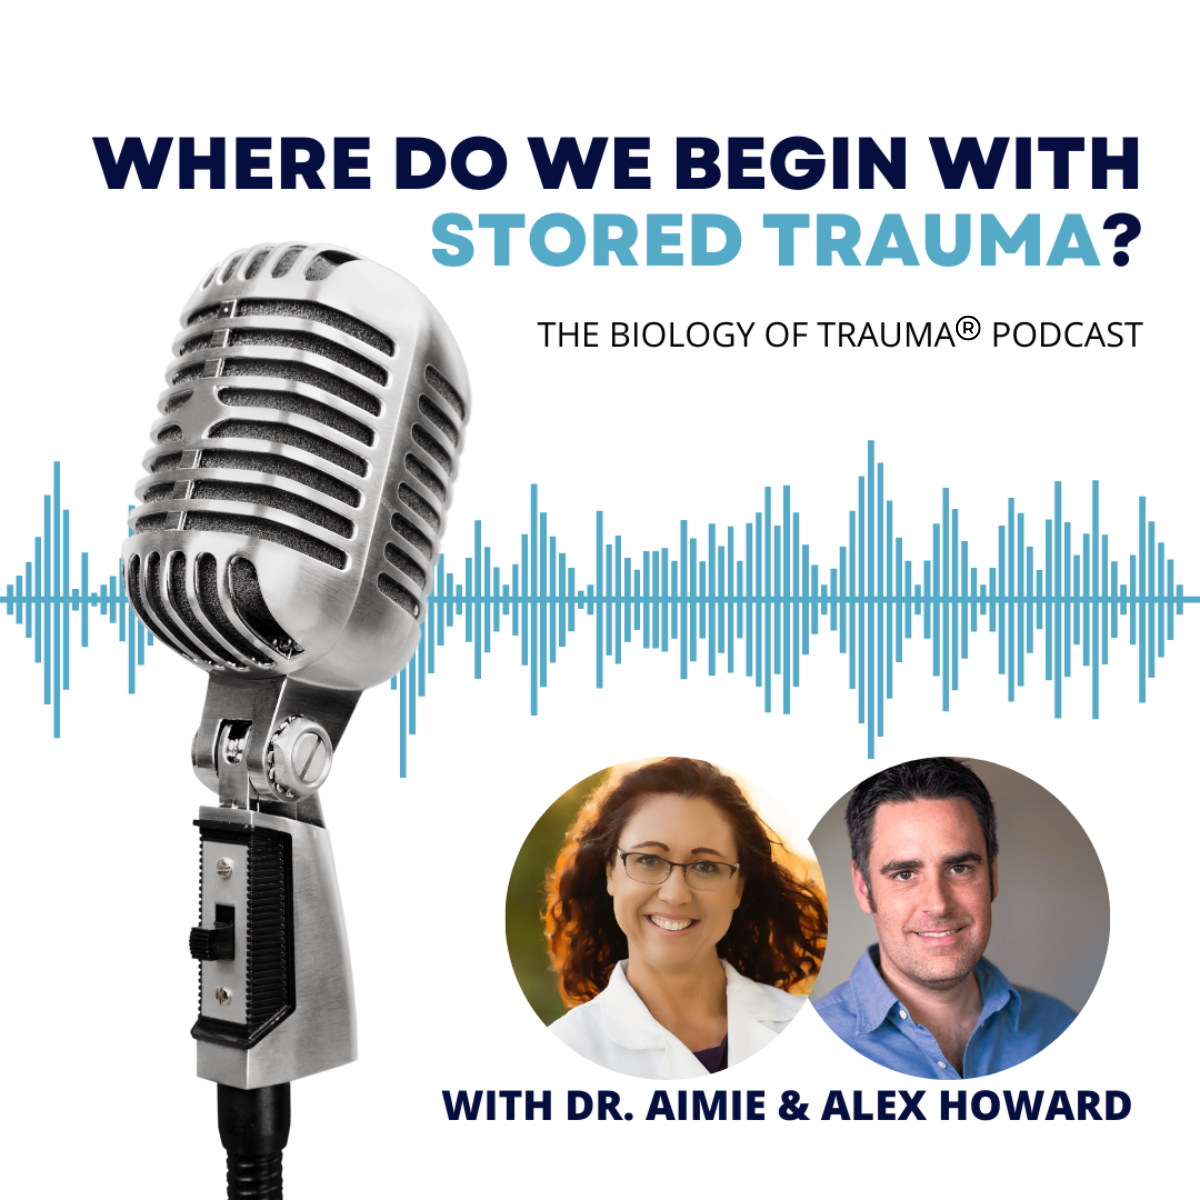 Where do we begin with stored trauma podcast